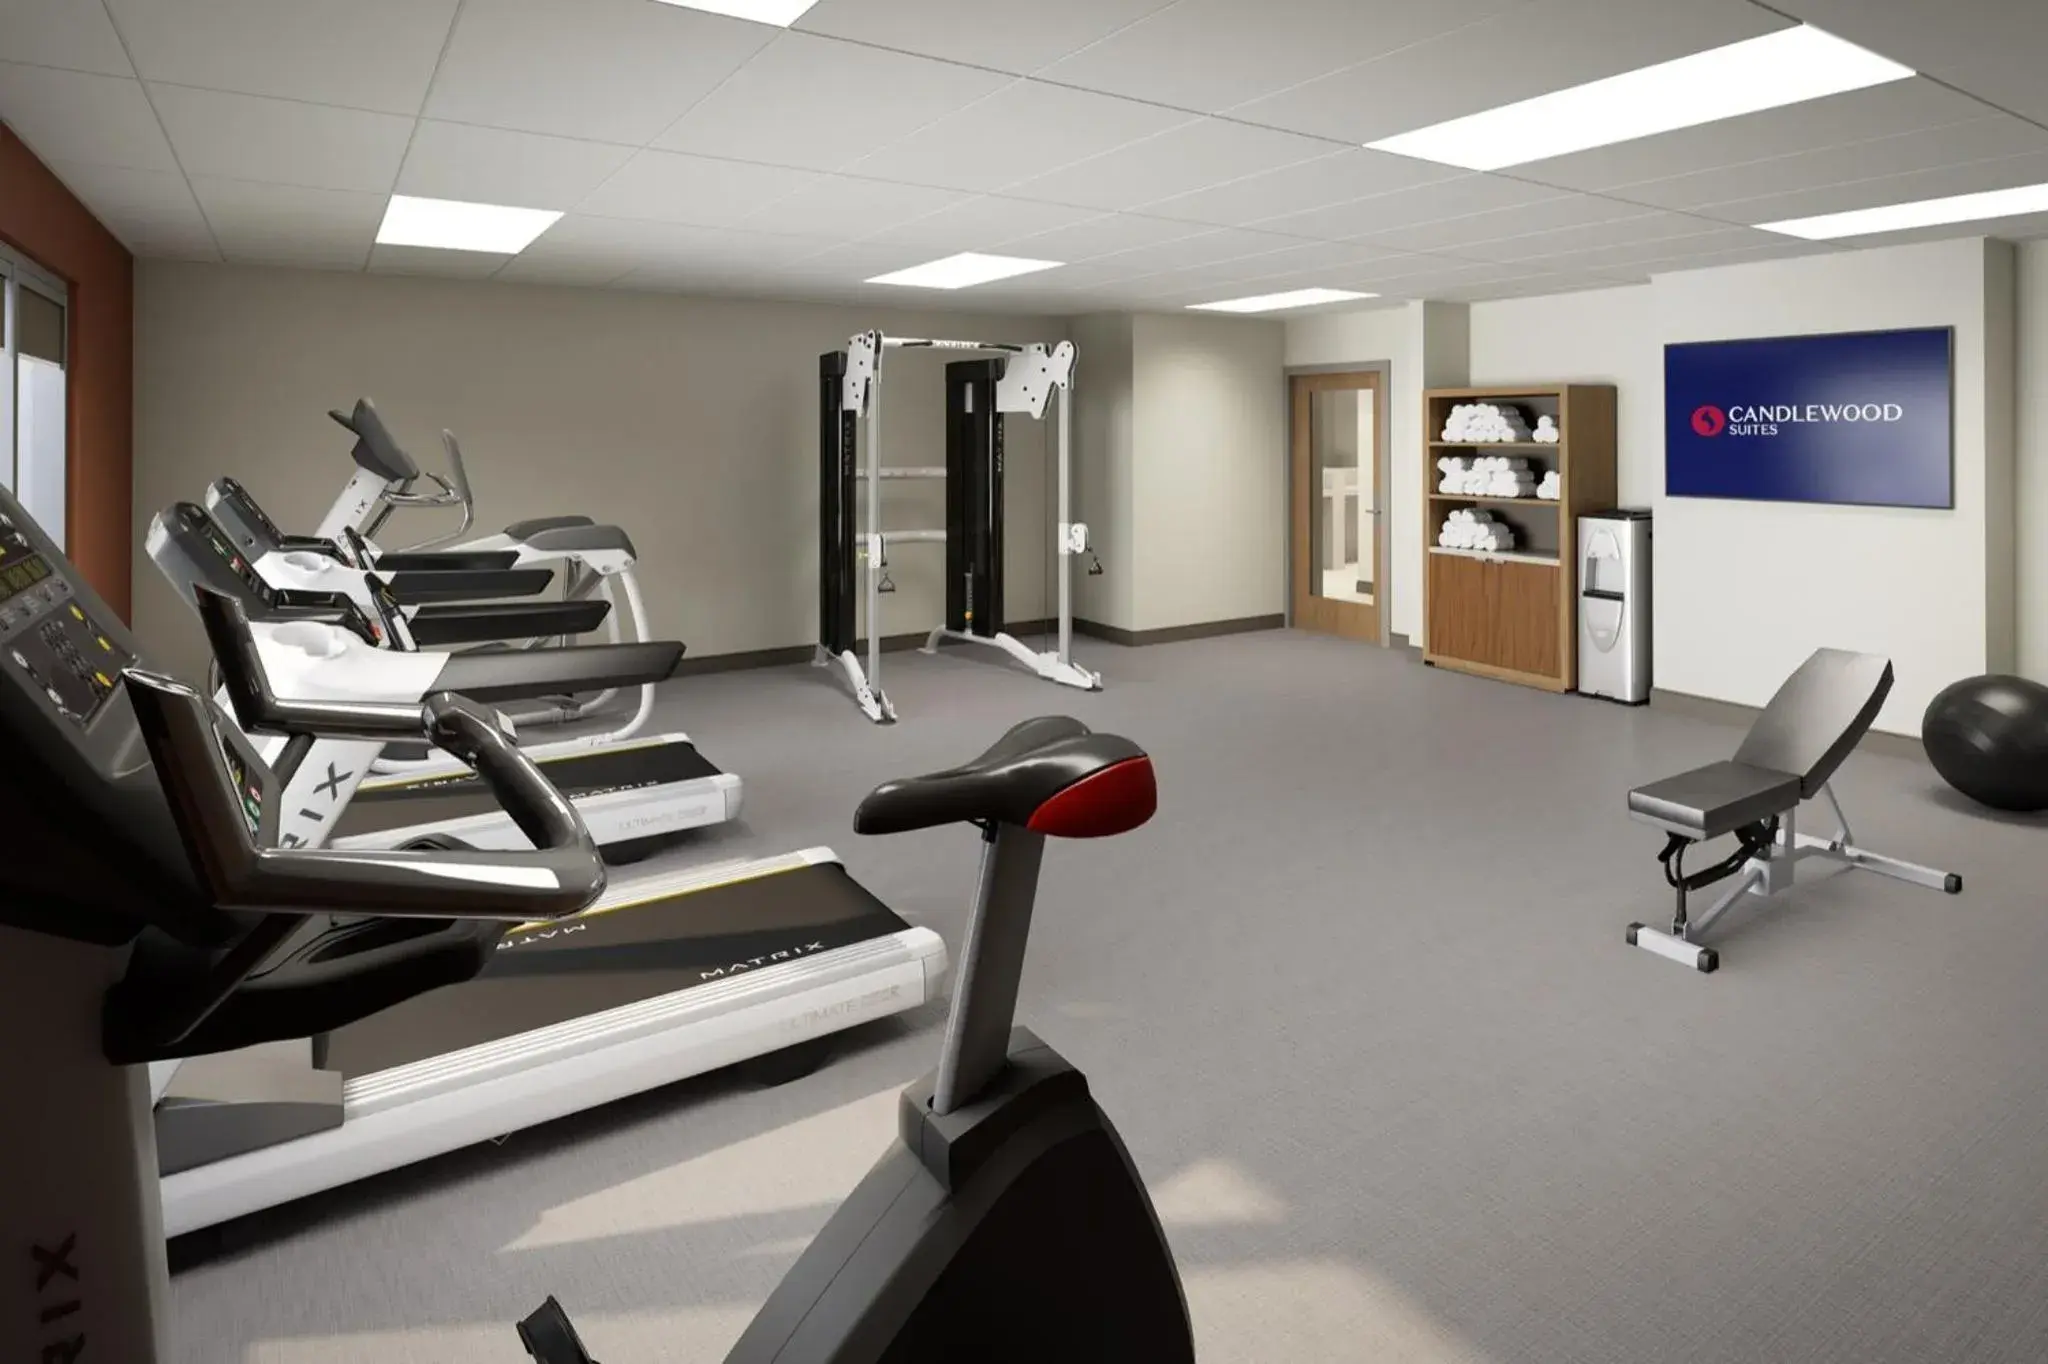 Fitness centre/facilities, Fitness Center/Facilities in Candlewood Suites Jackson